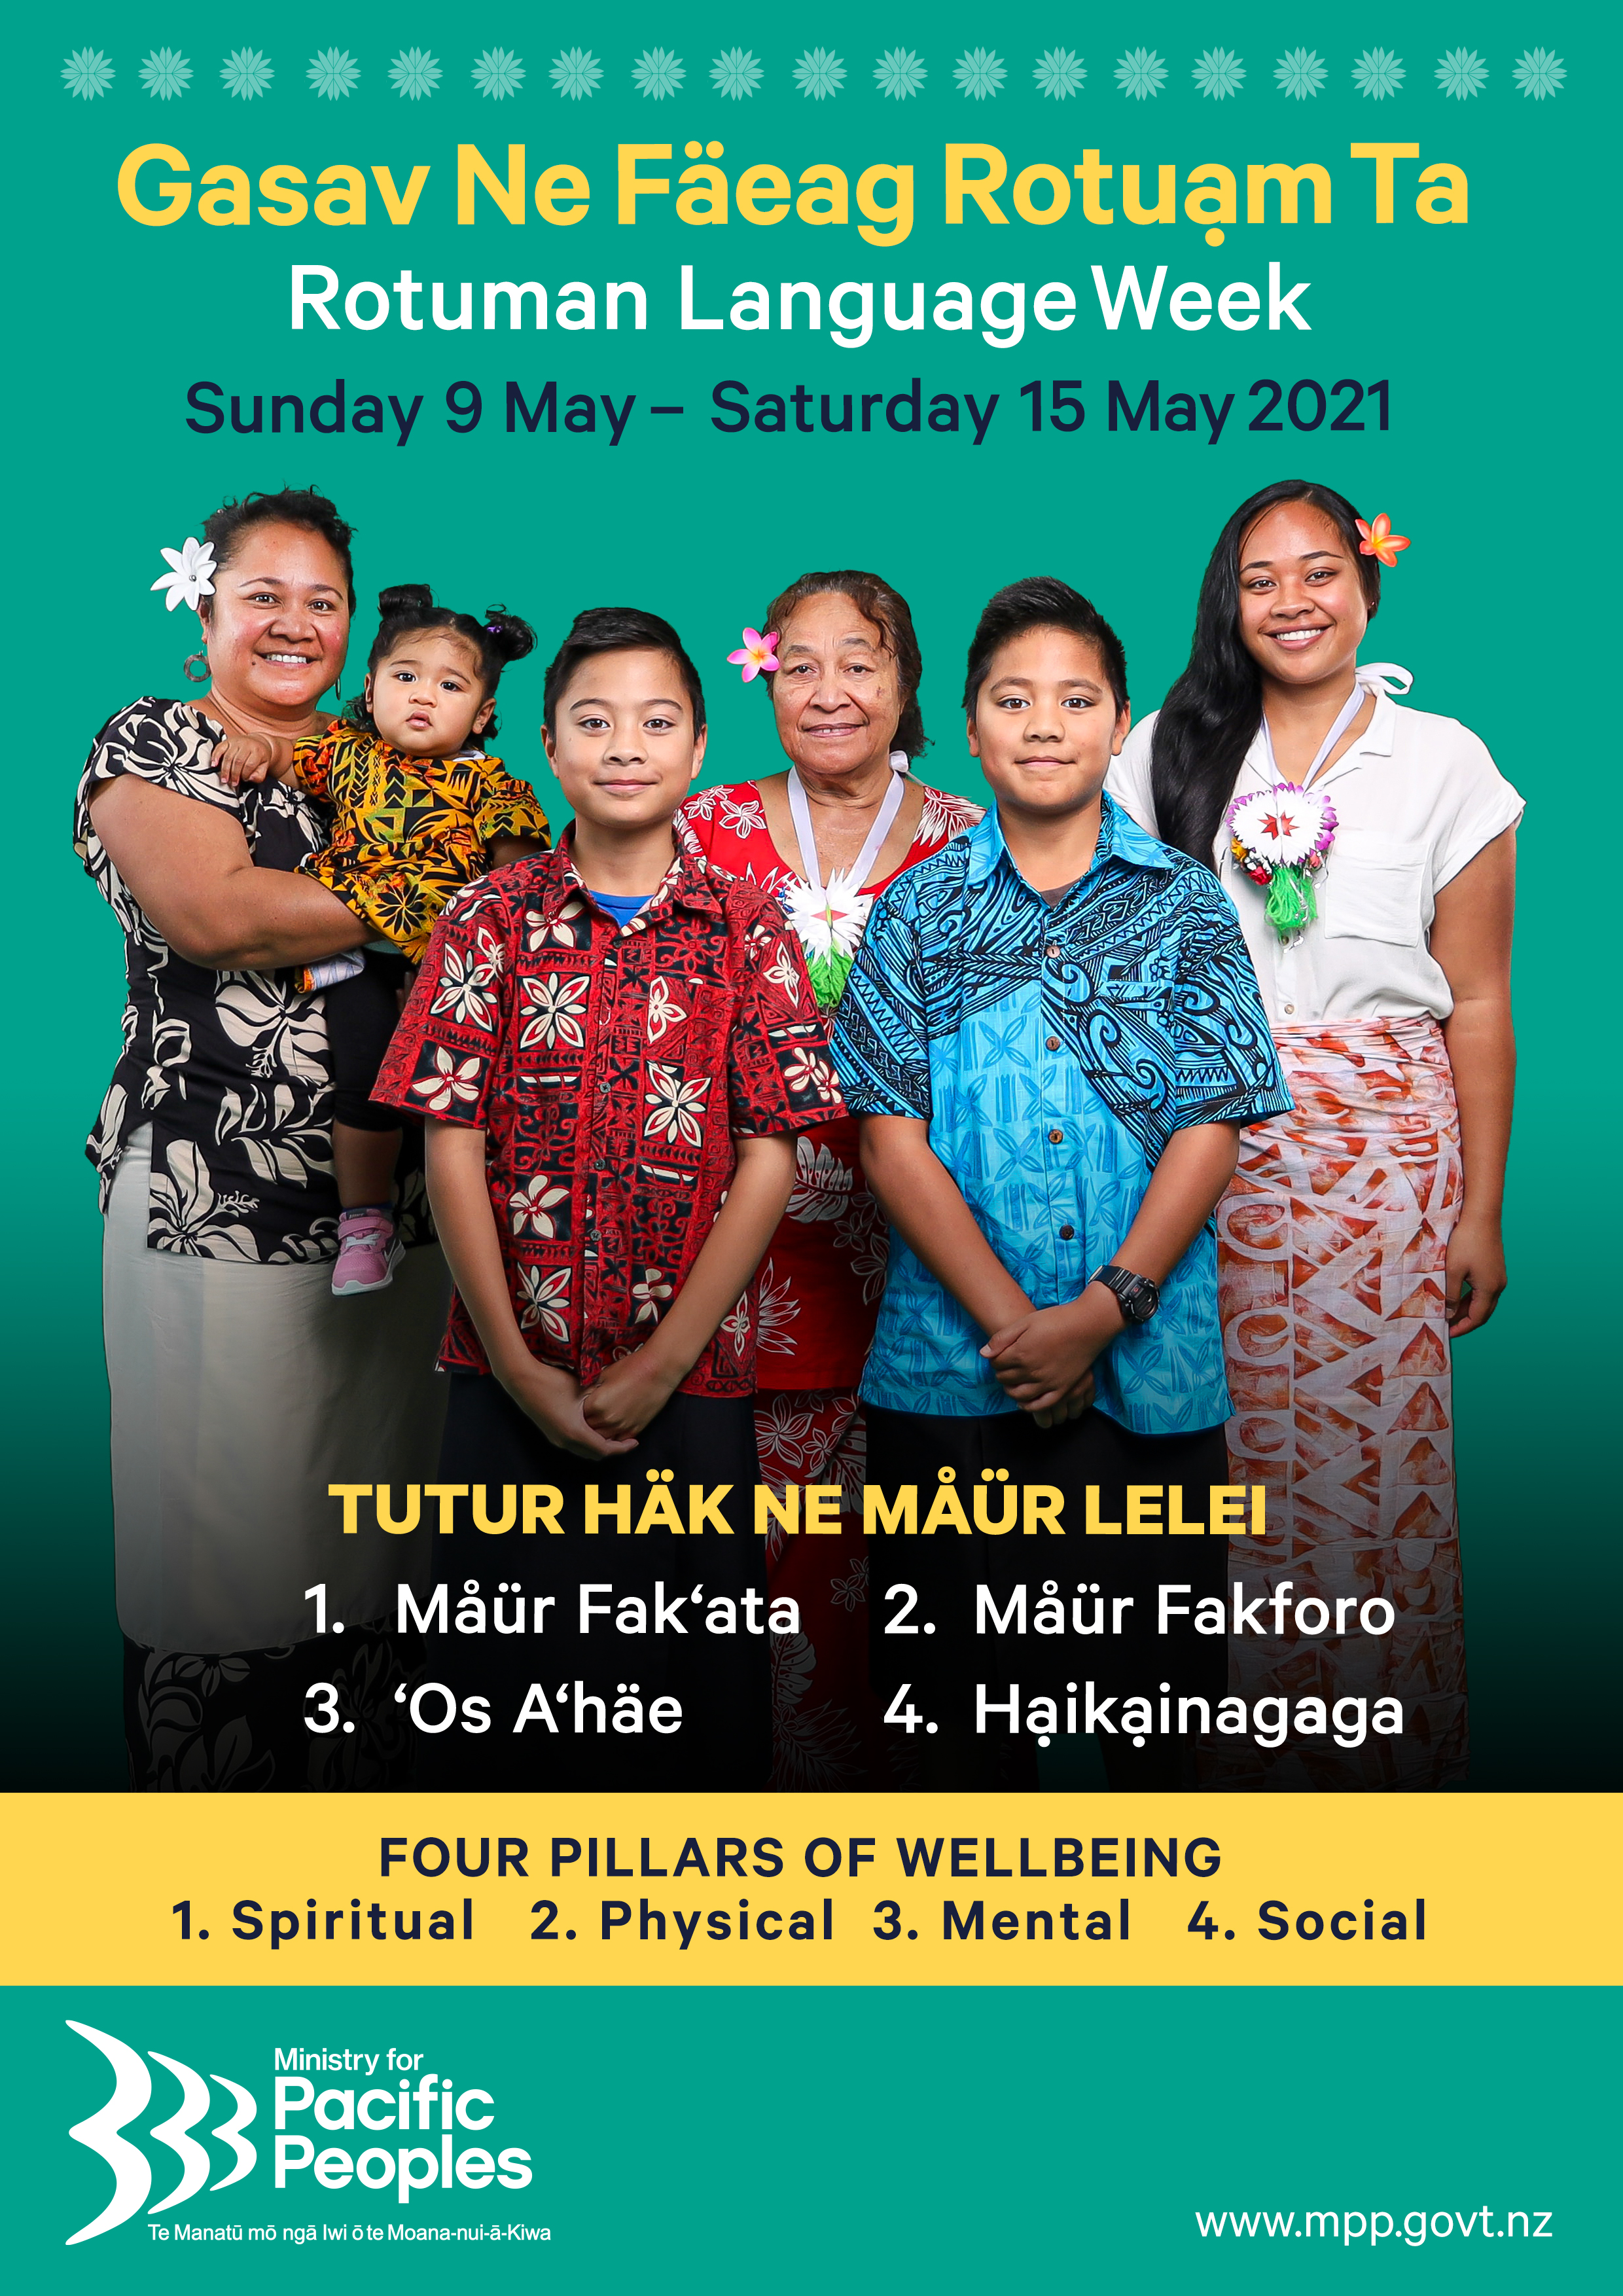 Ministry for Pacific Peoples — Rotuman Language Week 2021